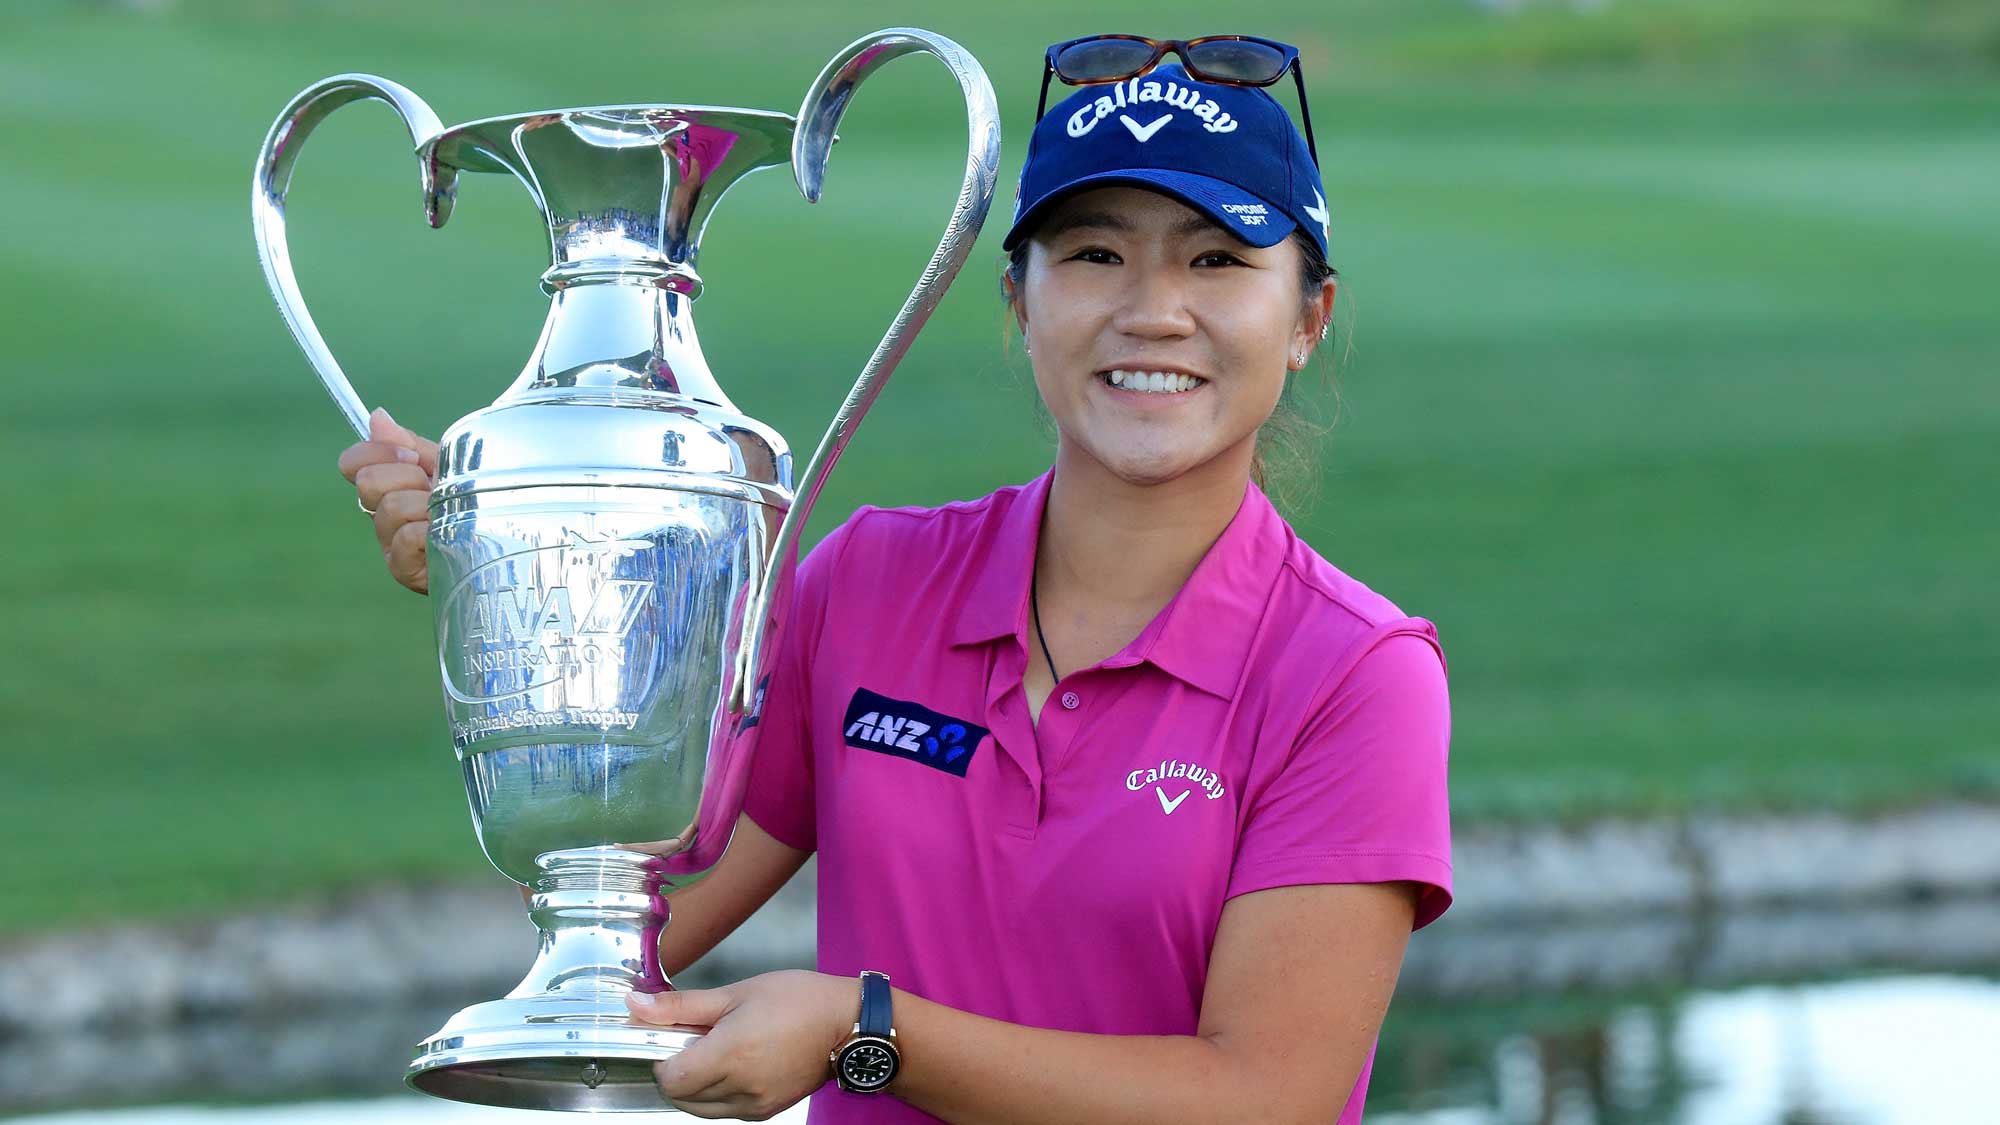 Lydia Ko Youngest TwoTime Major Champion, Captures ANA